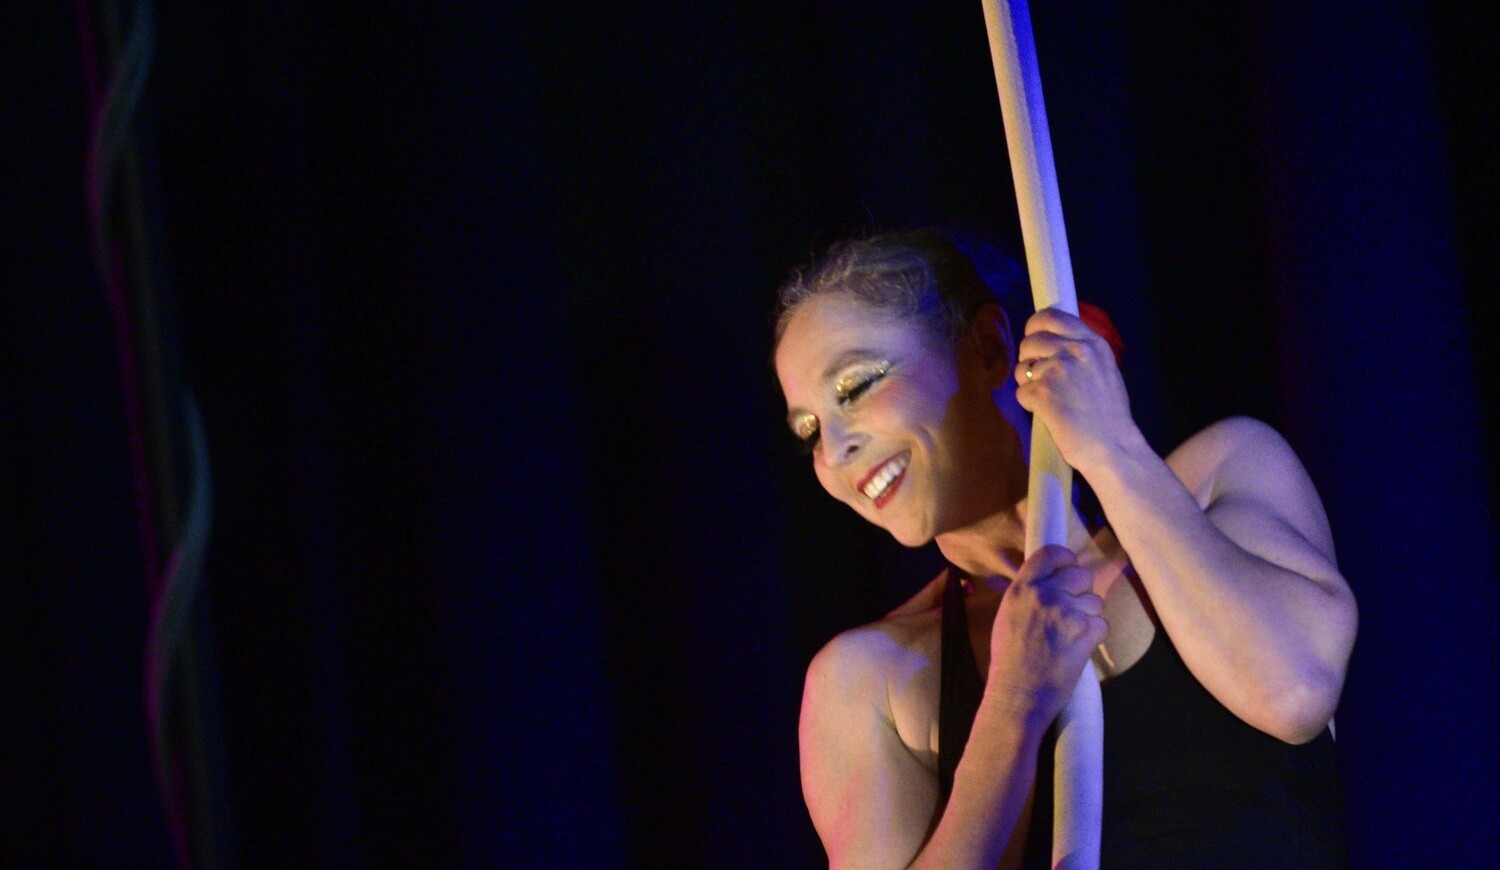 A smiling acrobat holds tight to a rope against a black background.